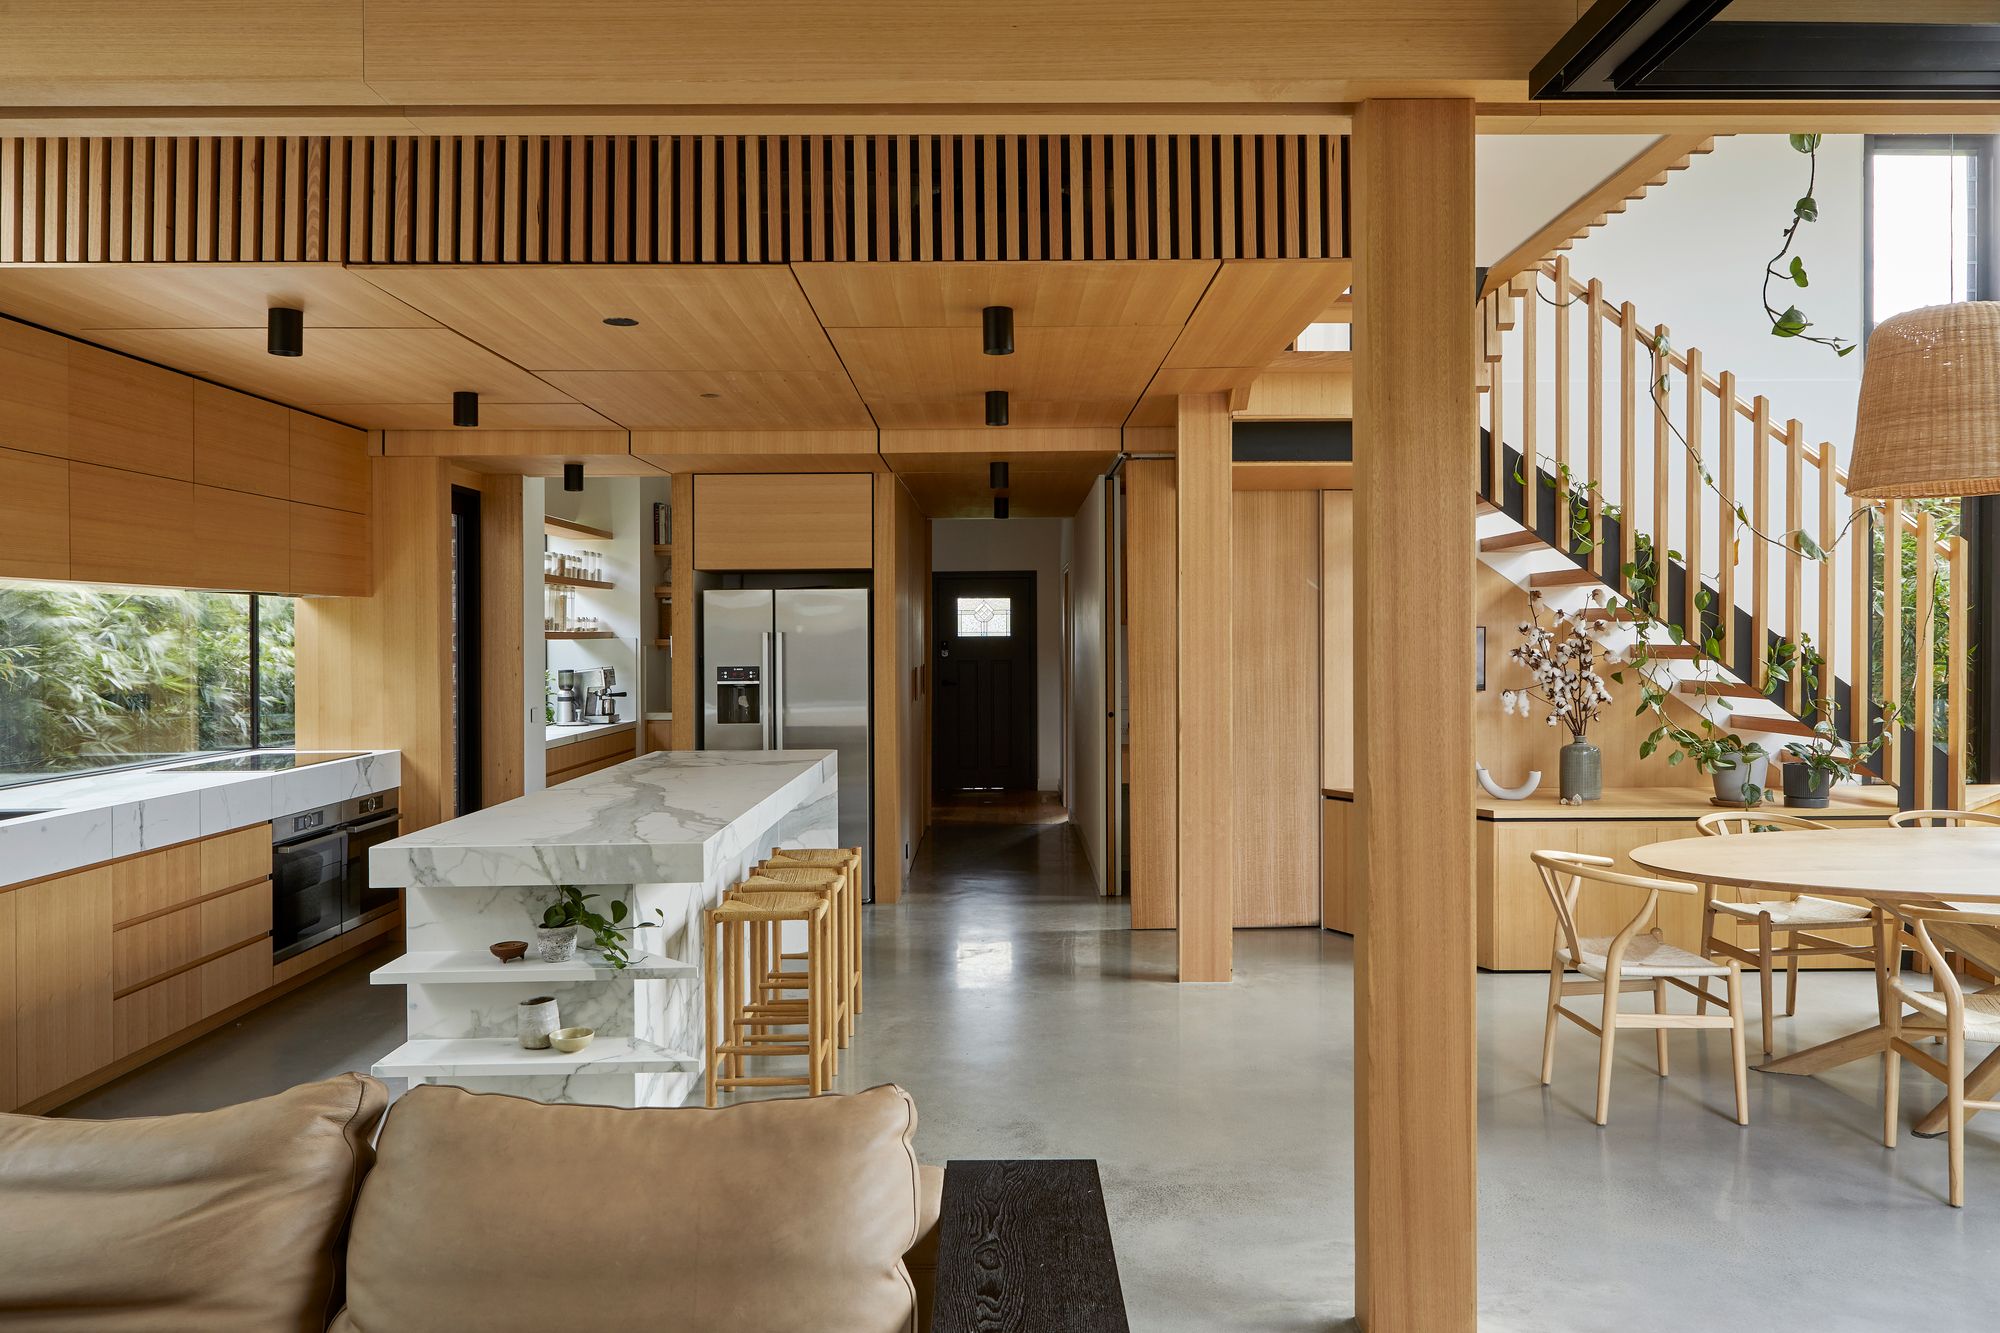 Timber Lantern House by mcmahon and nerlich. Living, dining and kitchen area.